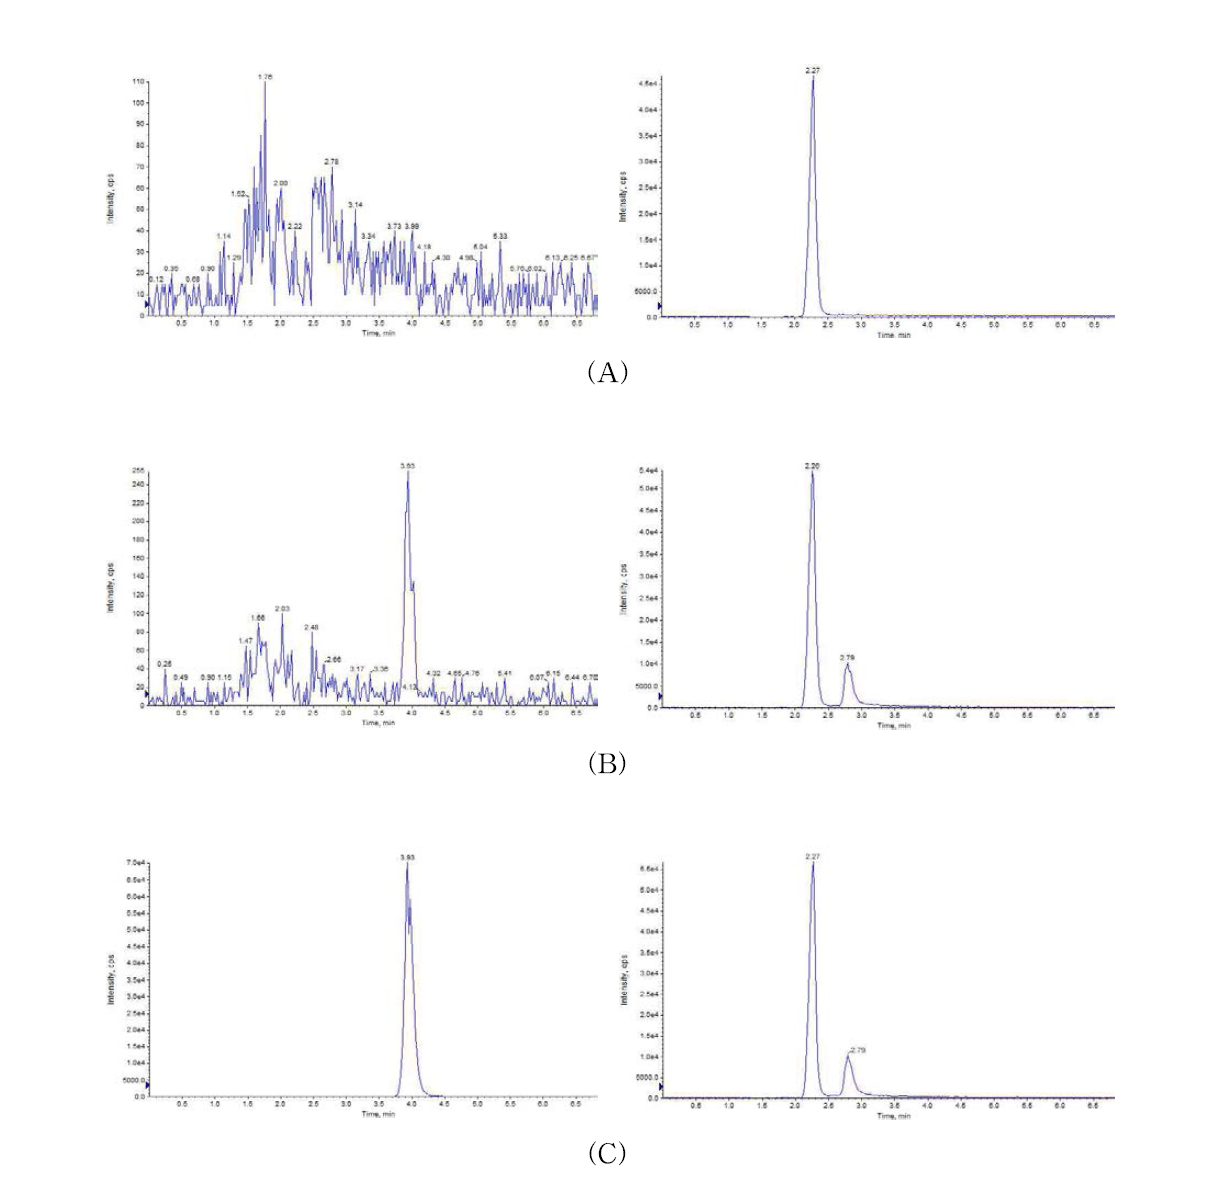 MRM chromatograms of MDMH (left) and I.S. (right) obtained from (A) blank rat plasma, (B) LLOQ concentration (0.2 μg/mL) of MDMH in plasma spiked with MDMH and I.S. and (C) ULOQ concentration (100 μg/mL) of MDMH in plasma spiked with MDMH and I.S